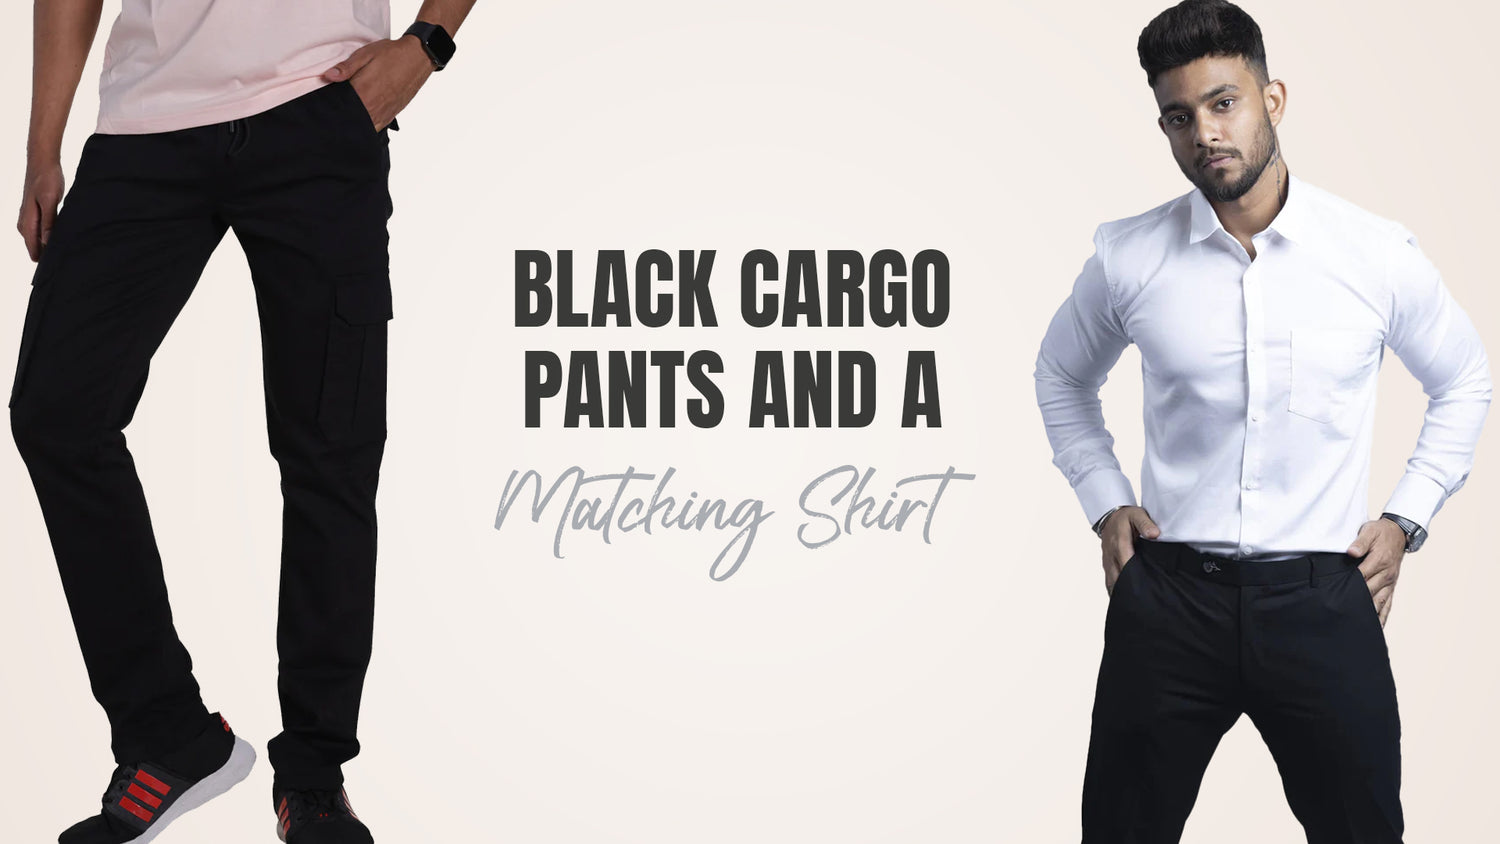 Black Cargo Pants and a Matching Shirt - The Perfect Combination